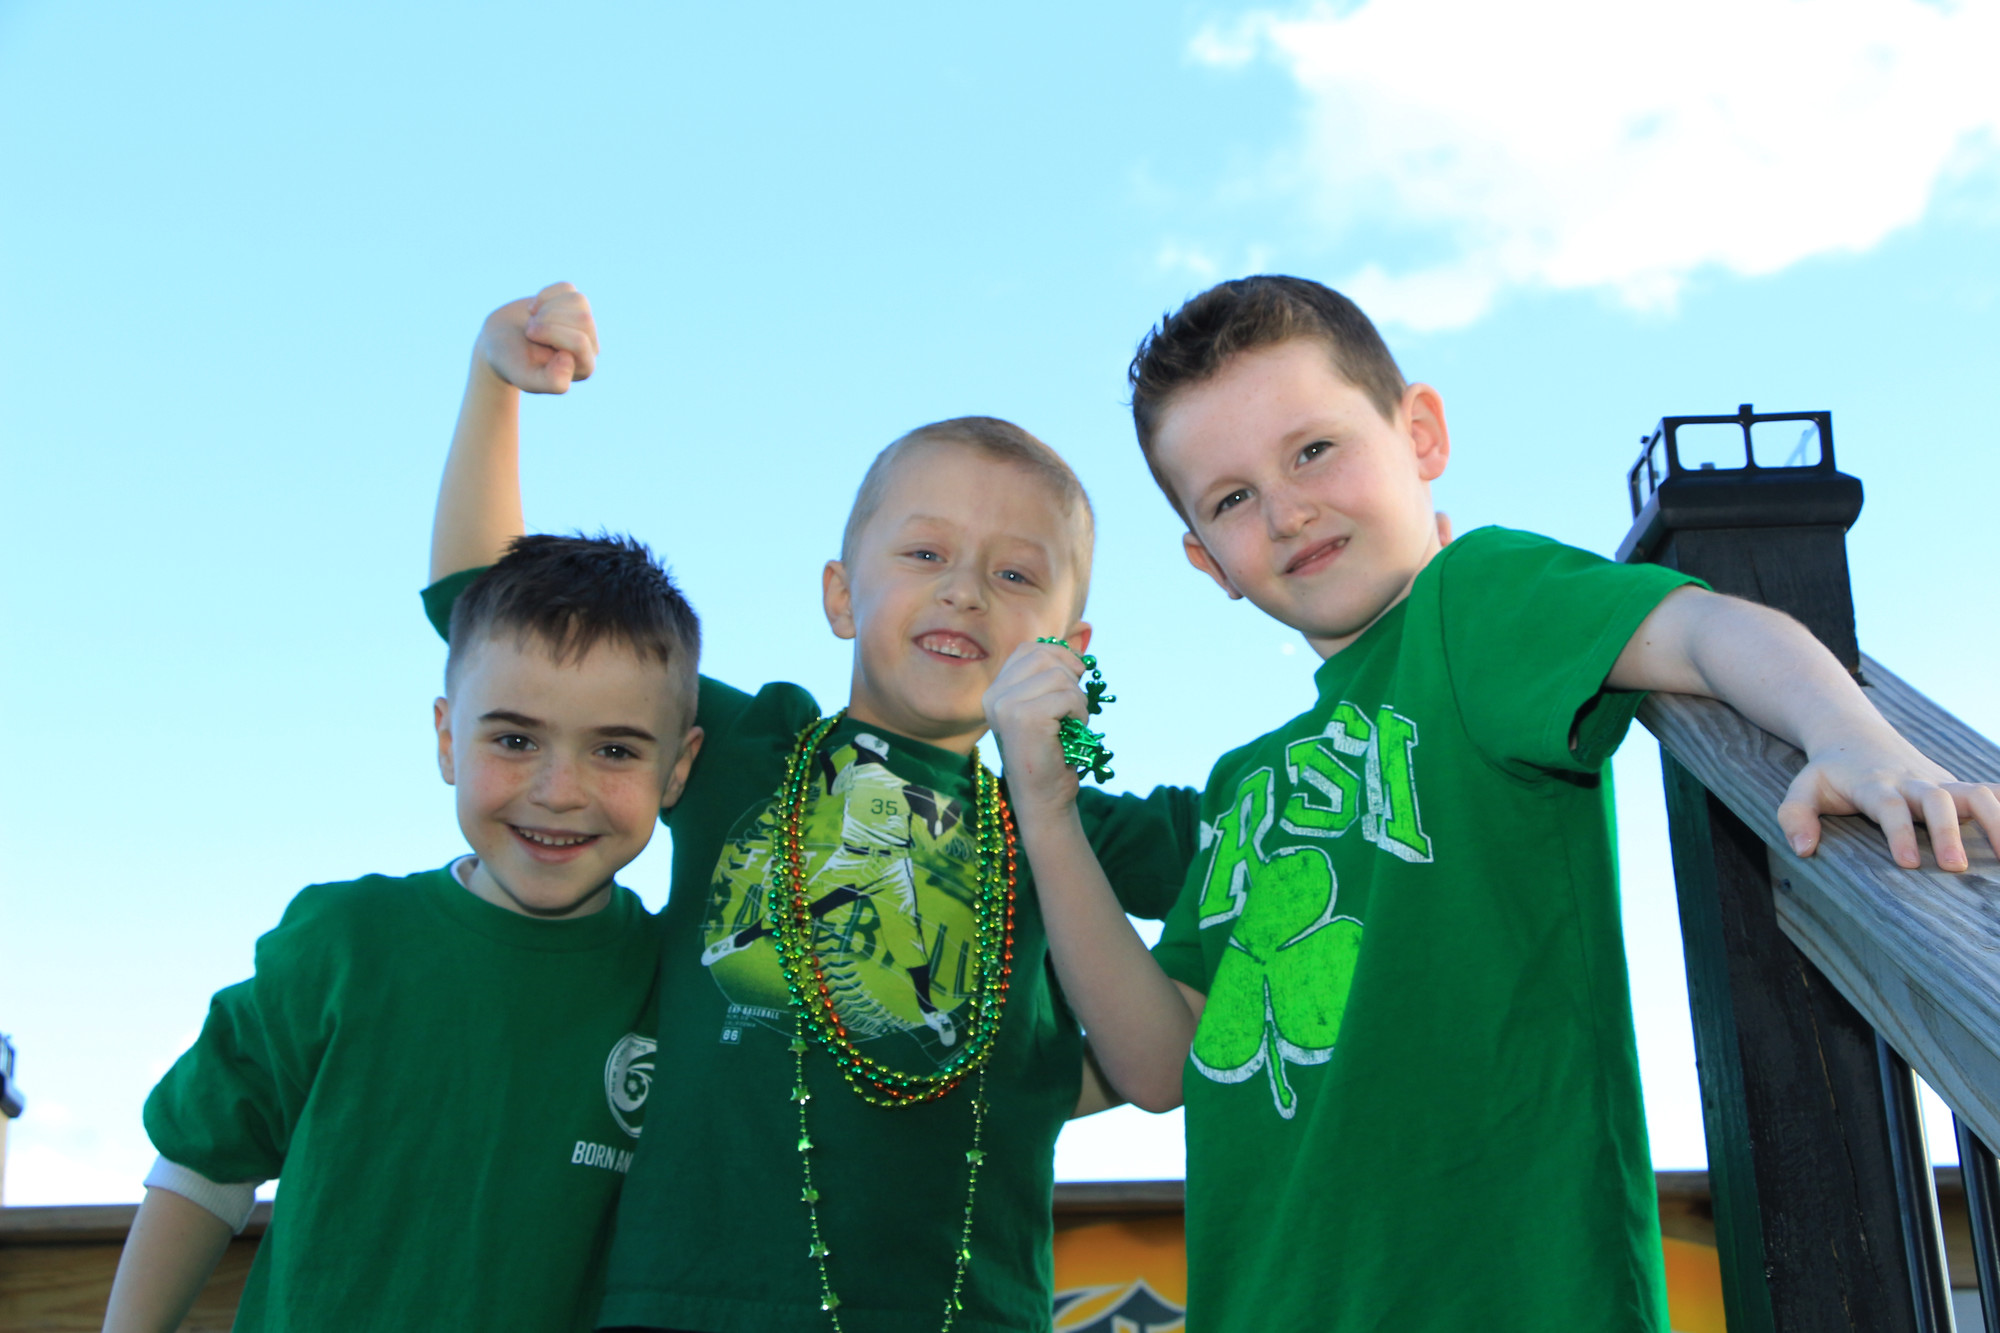 These boys were ready for fun on St. Patrick’s Day with family and friends.  From left were 6 year olds Sean Mahoney, Jack Paul and Tim Barrins.